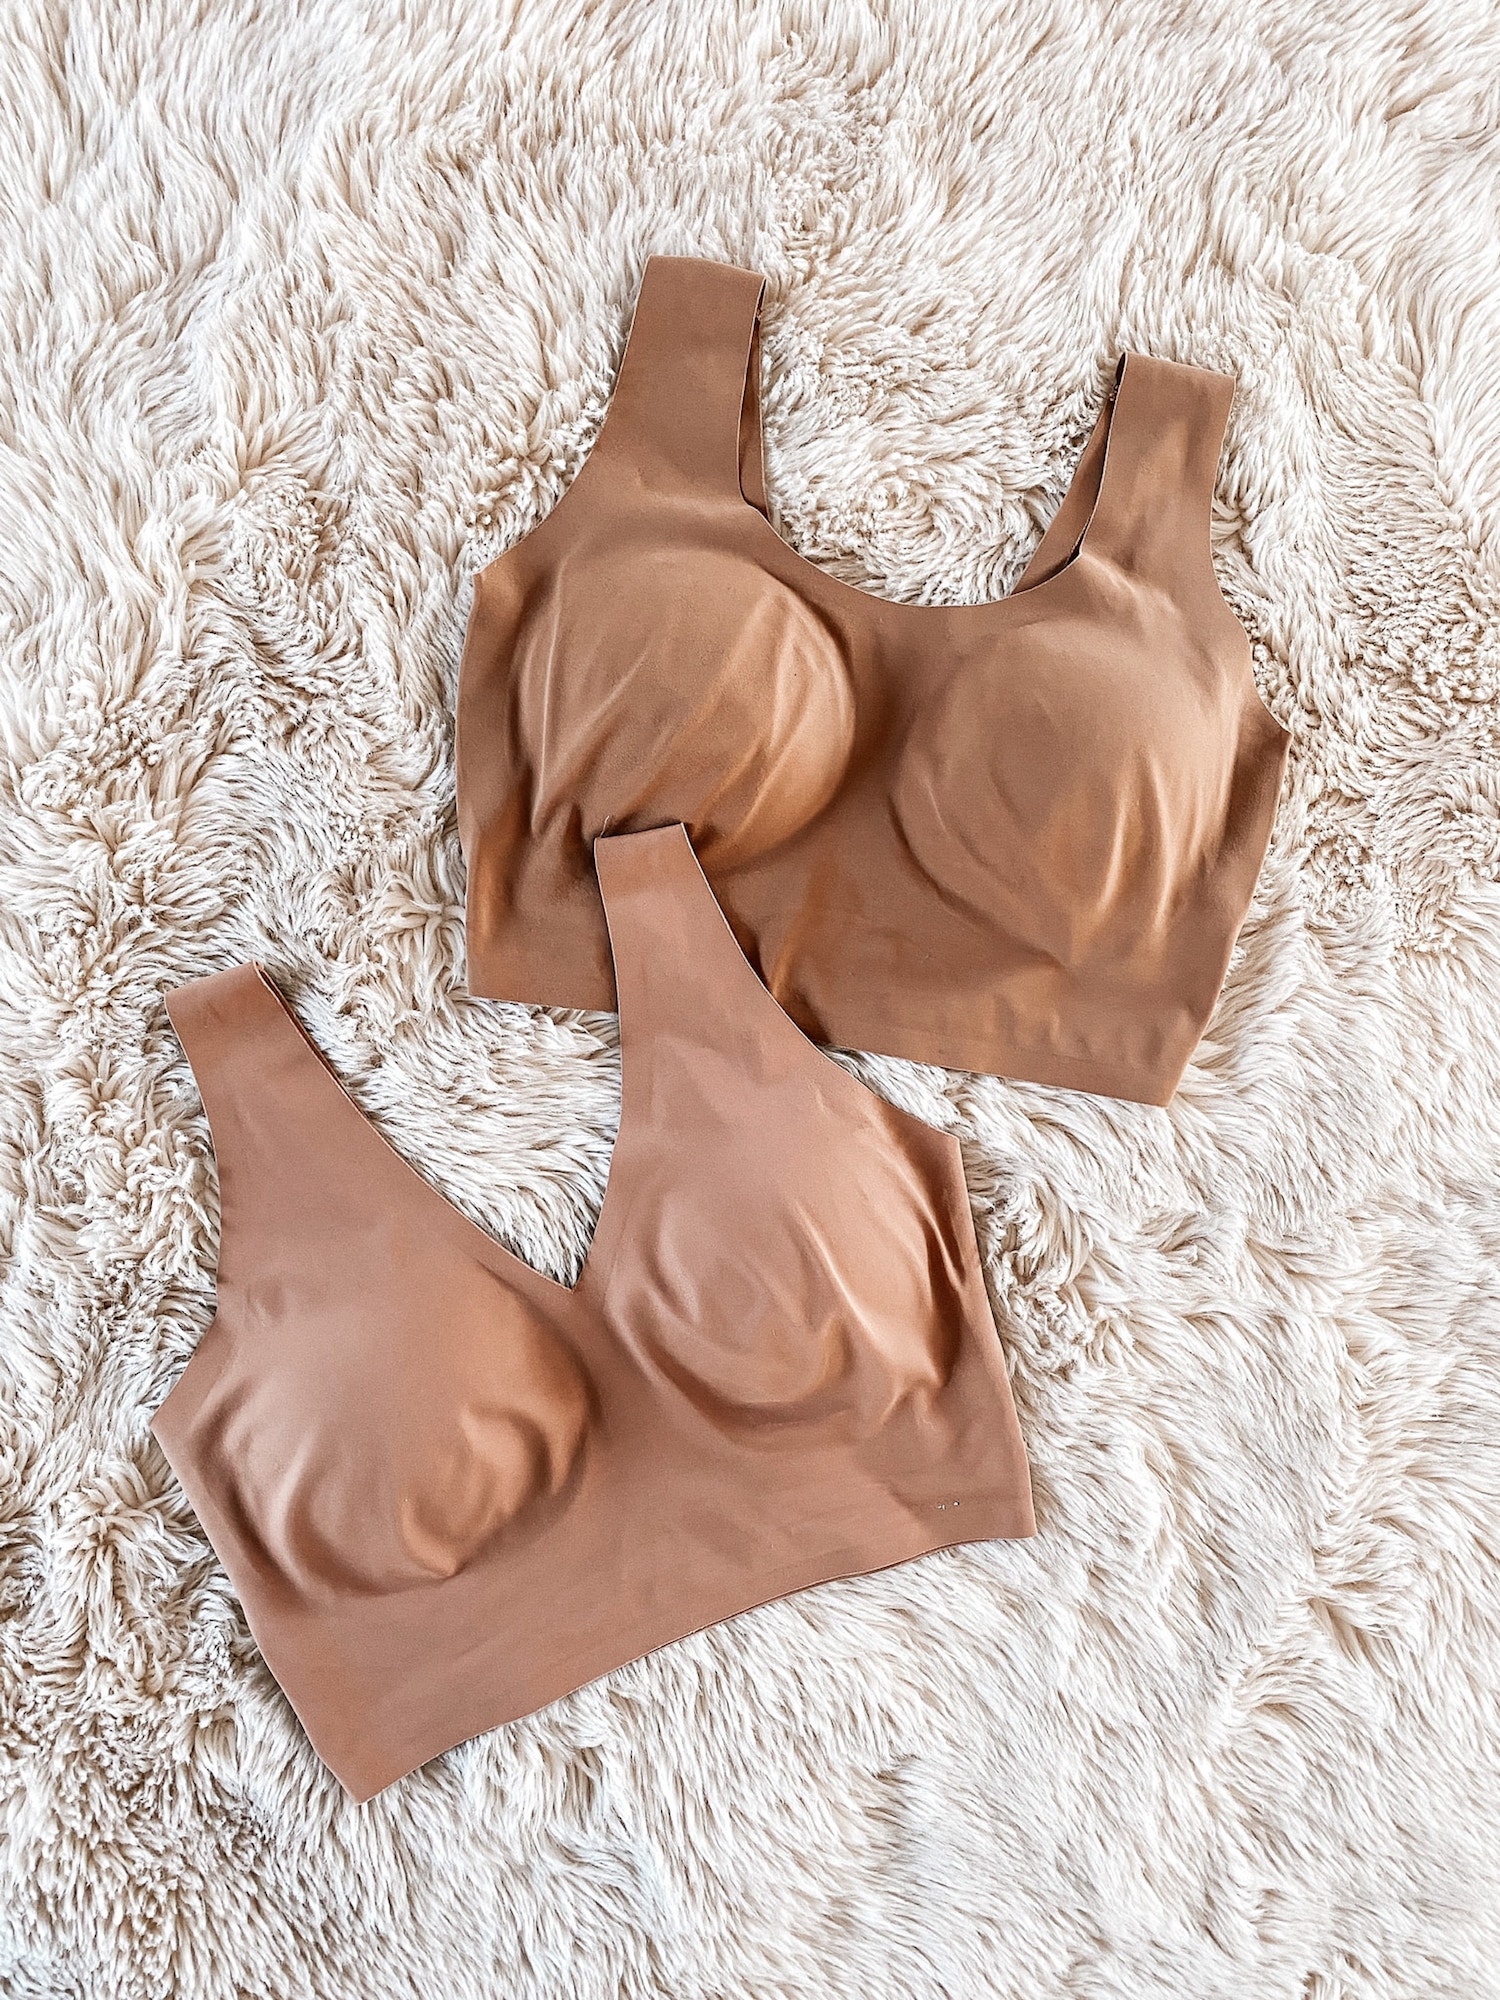 THE EVERYTHING BRA, NEW Maternity Nursing Bra. 🧡🧡🧡 YO!! I'm so excited  for this release… Part of my new BumpFit maternity